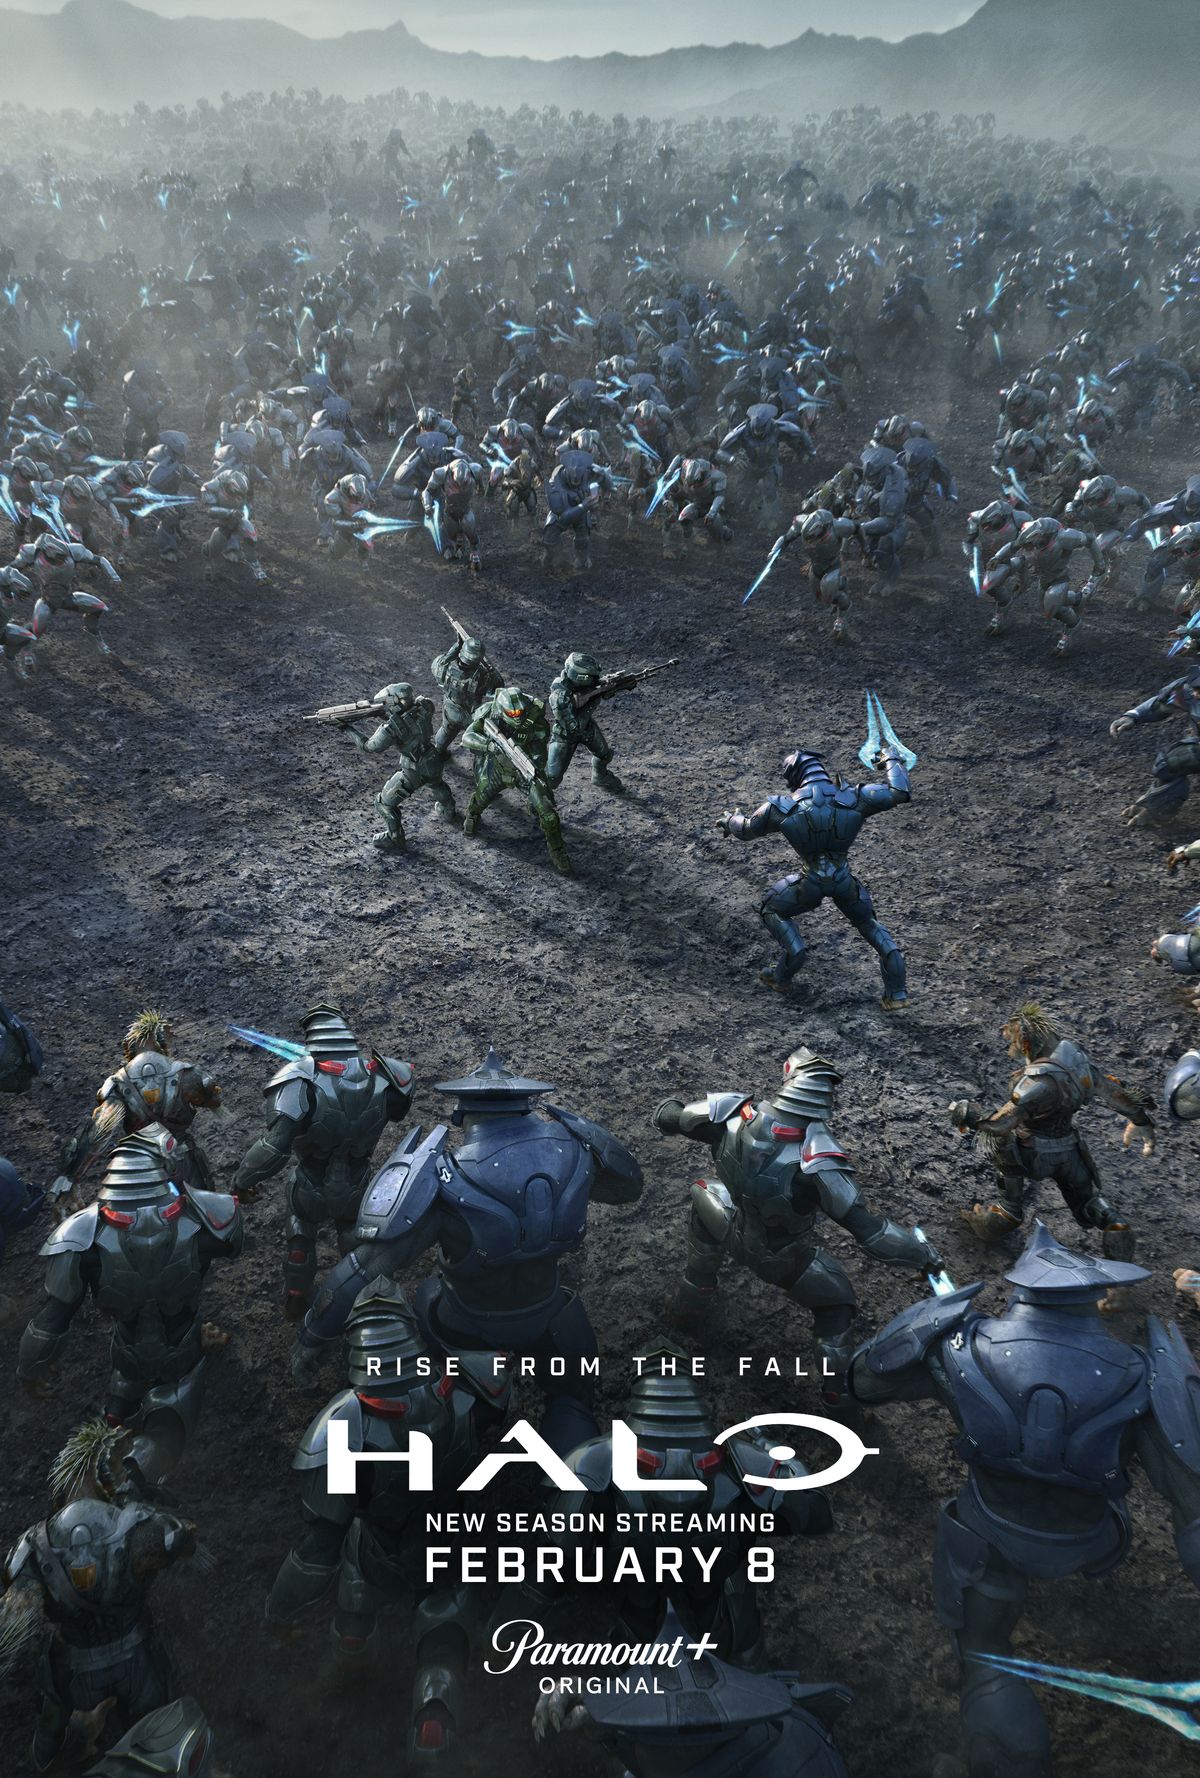 New Halo season 2 poster shows Master Chief fighting to stop the Fall